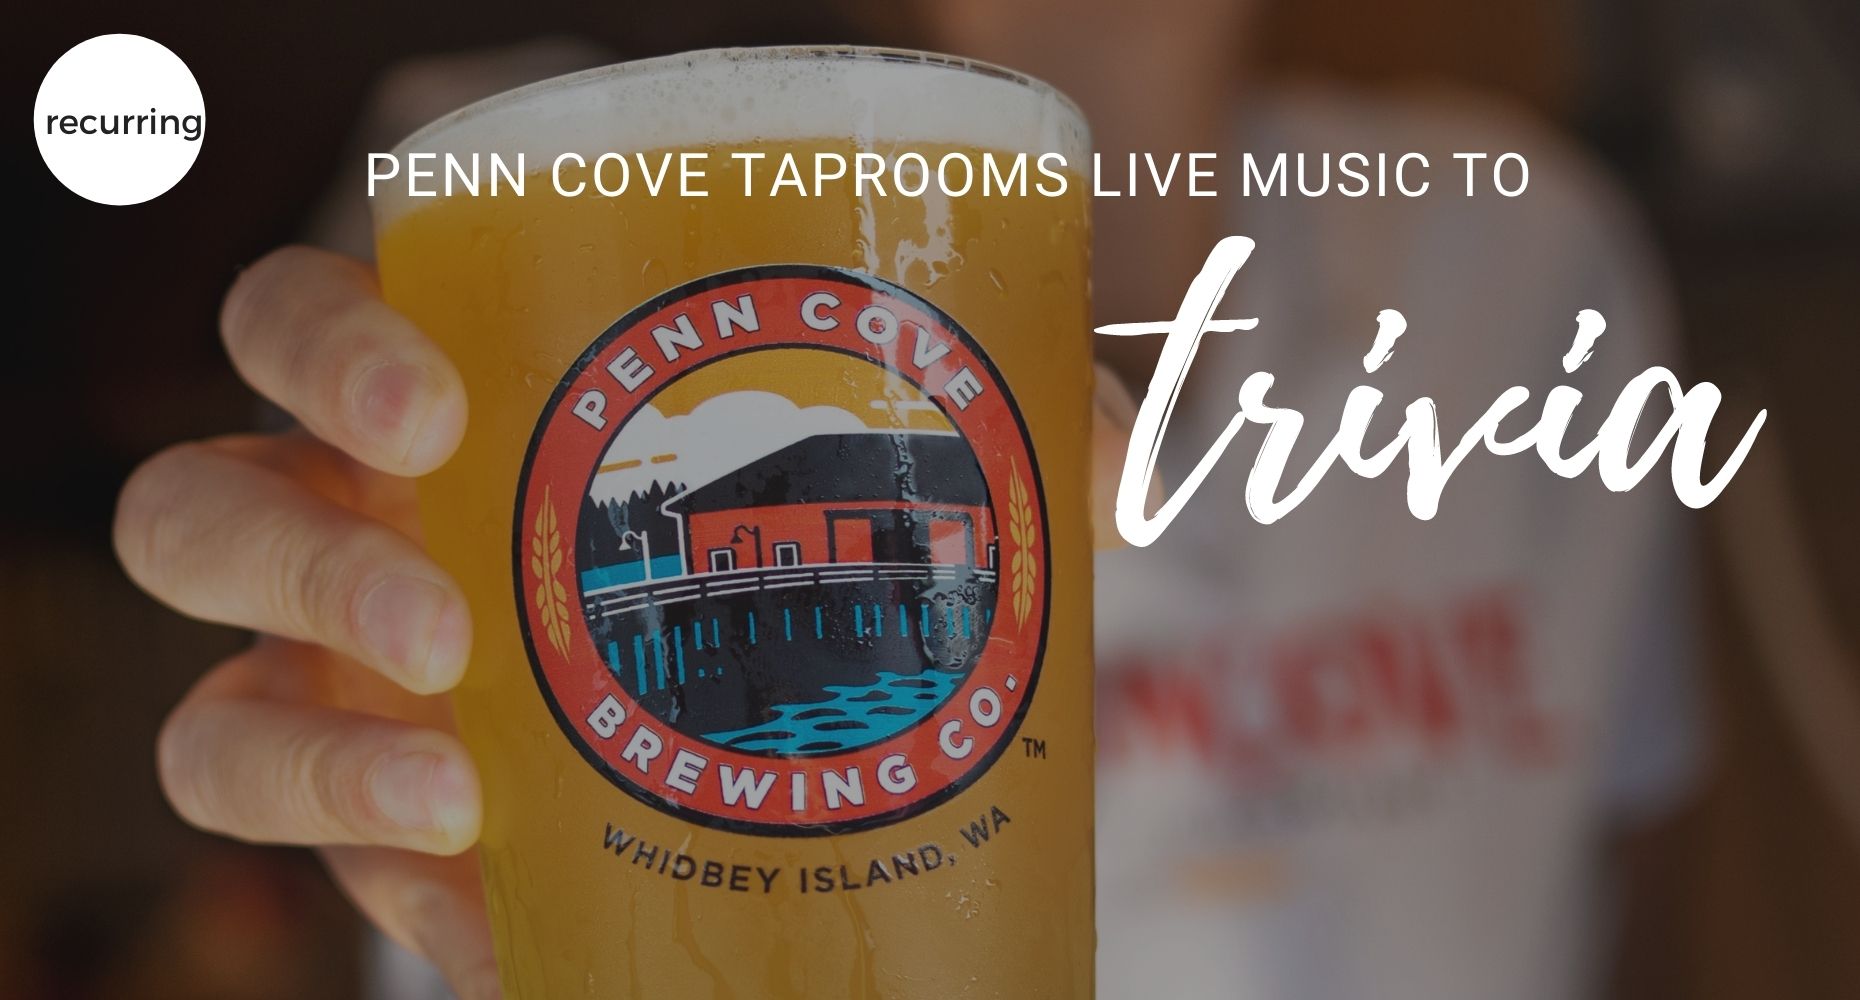 Penn Cove Tap Room, Trivia, Live Music, Events, Whidbey Island